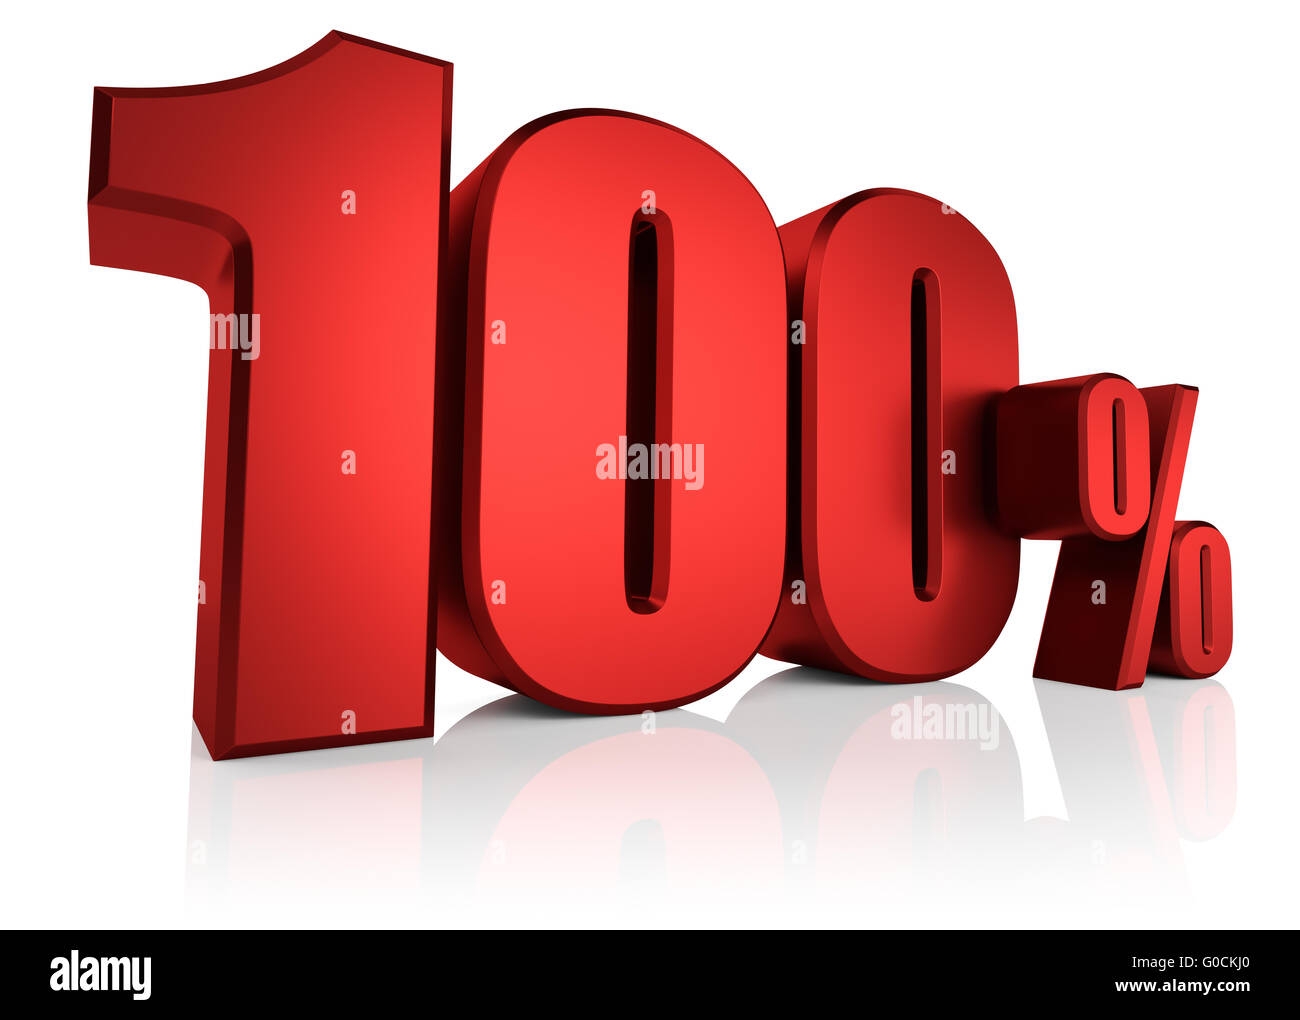 Red 100 Percent Stock Photo